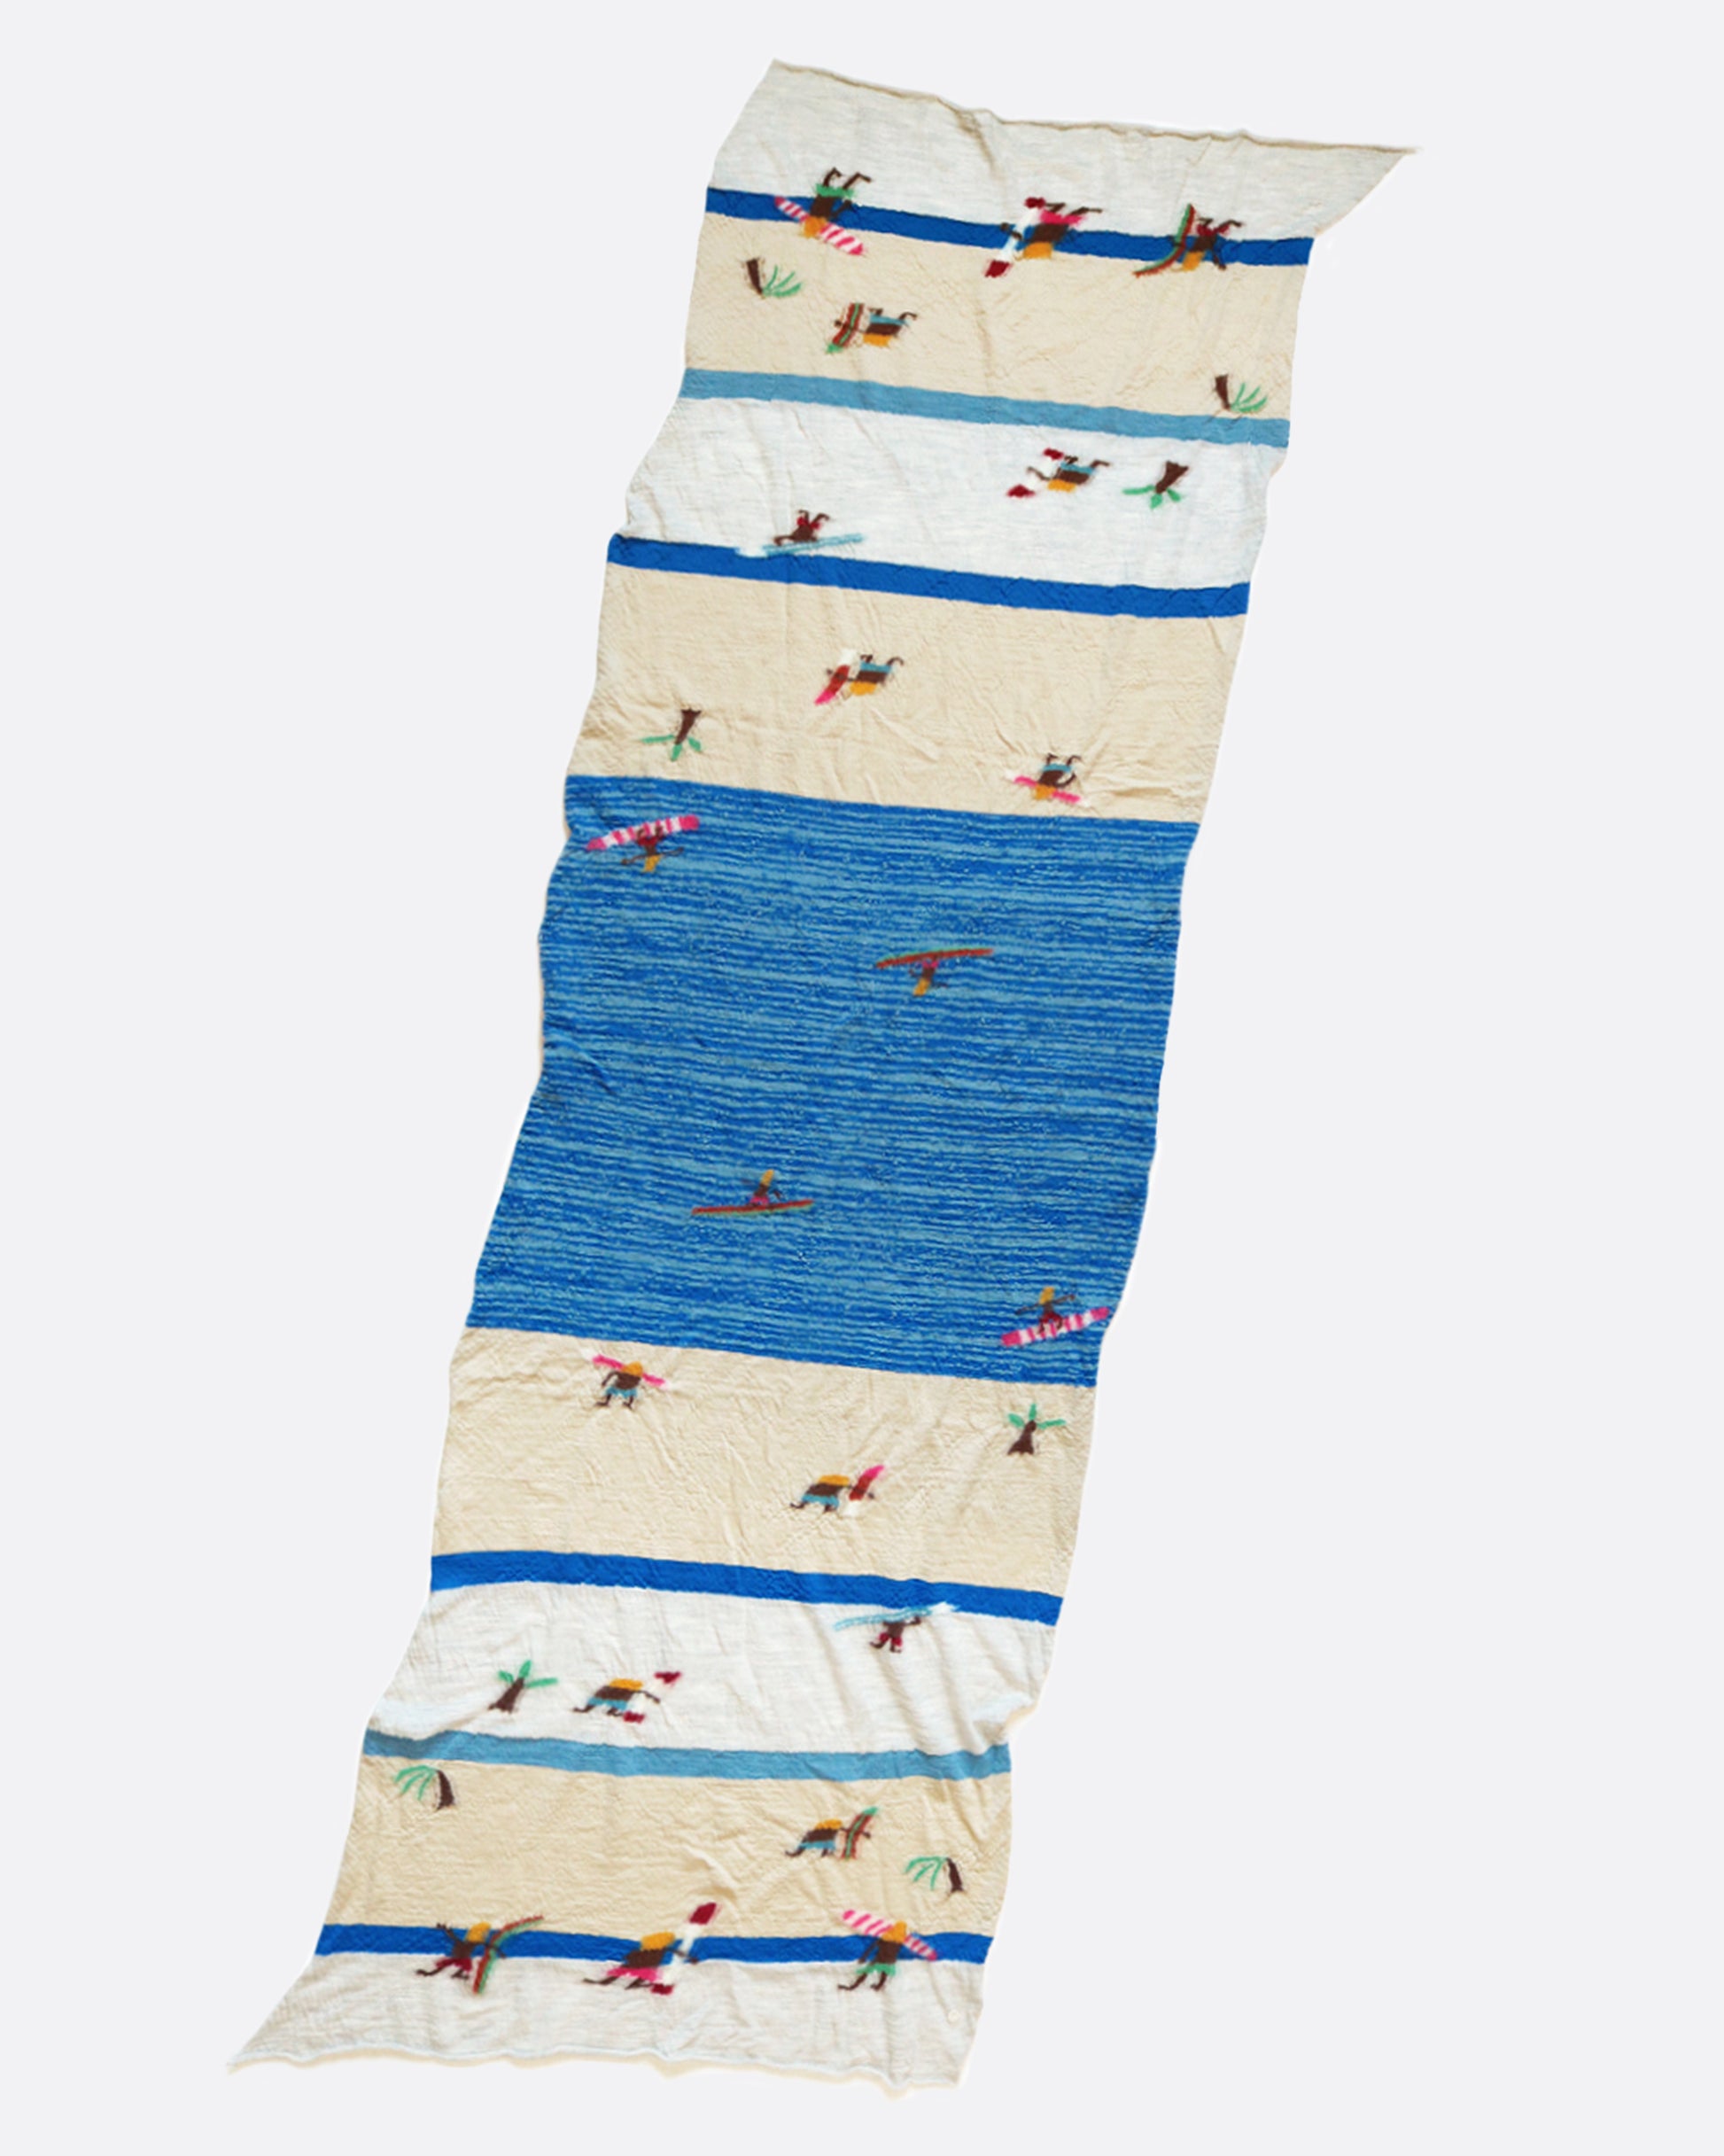 A compressed wool scarf with a fun pattern of surfers on a sandy beach.